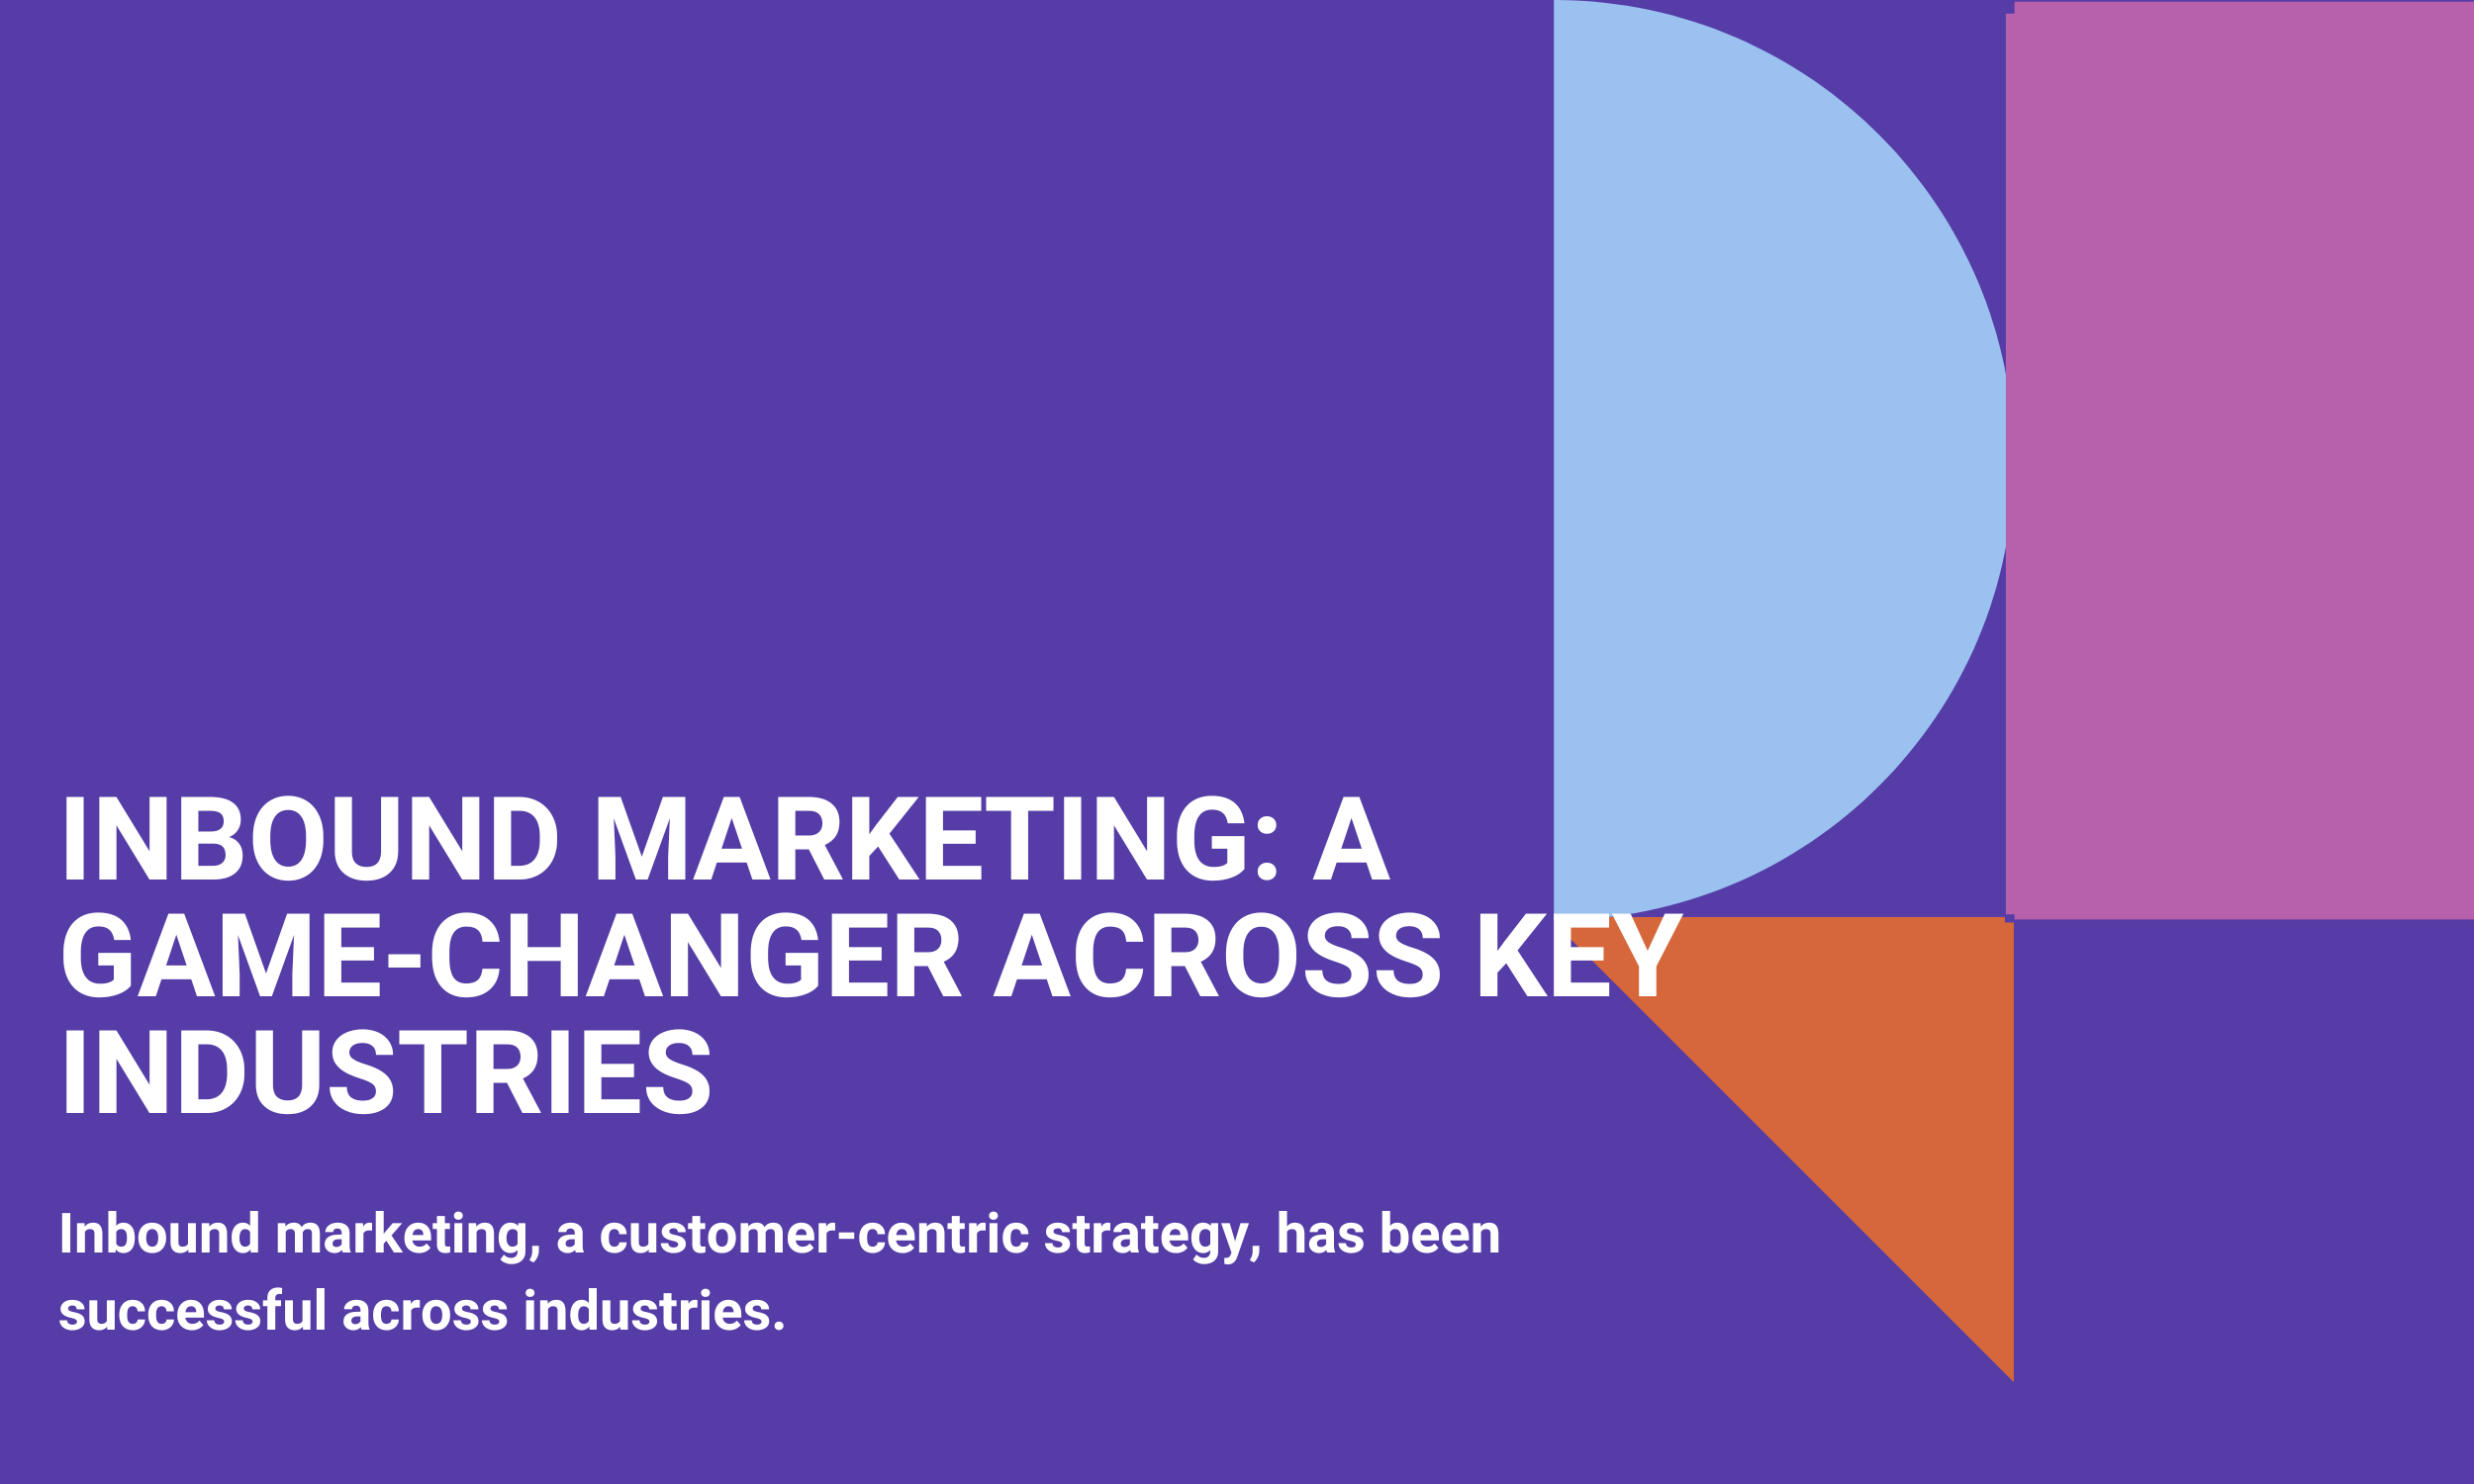 Inbound Marketing: A Game-Changer Across Key Industries